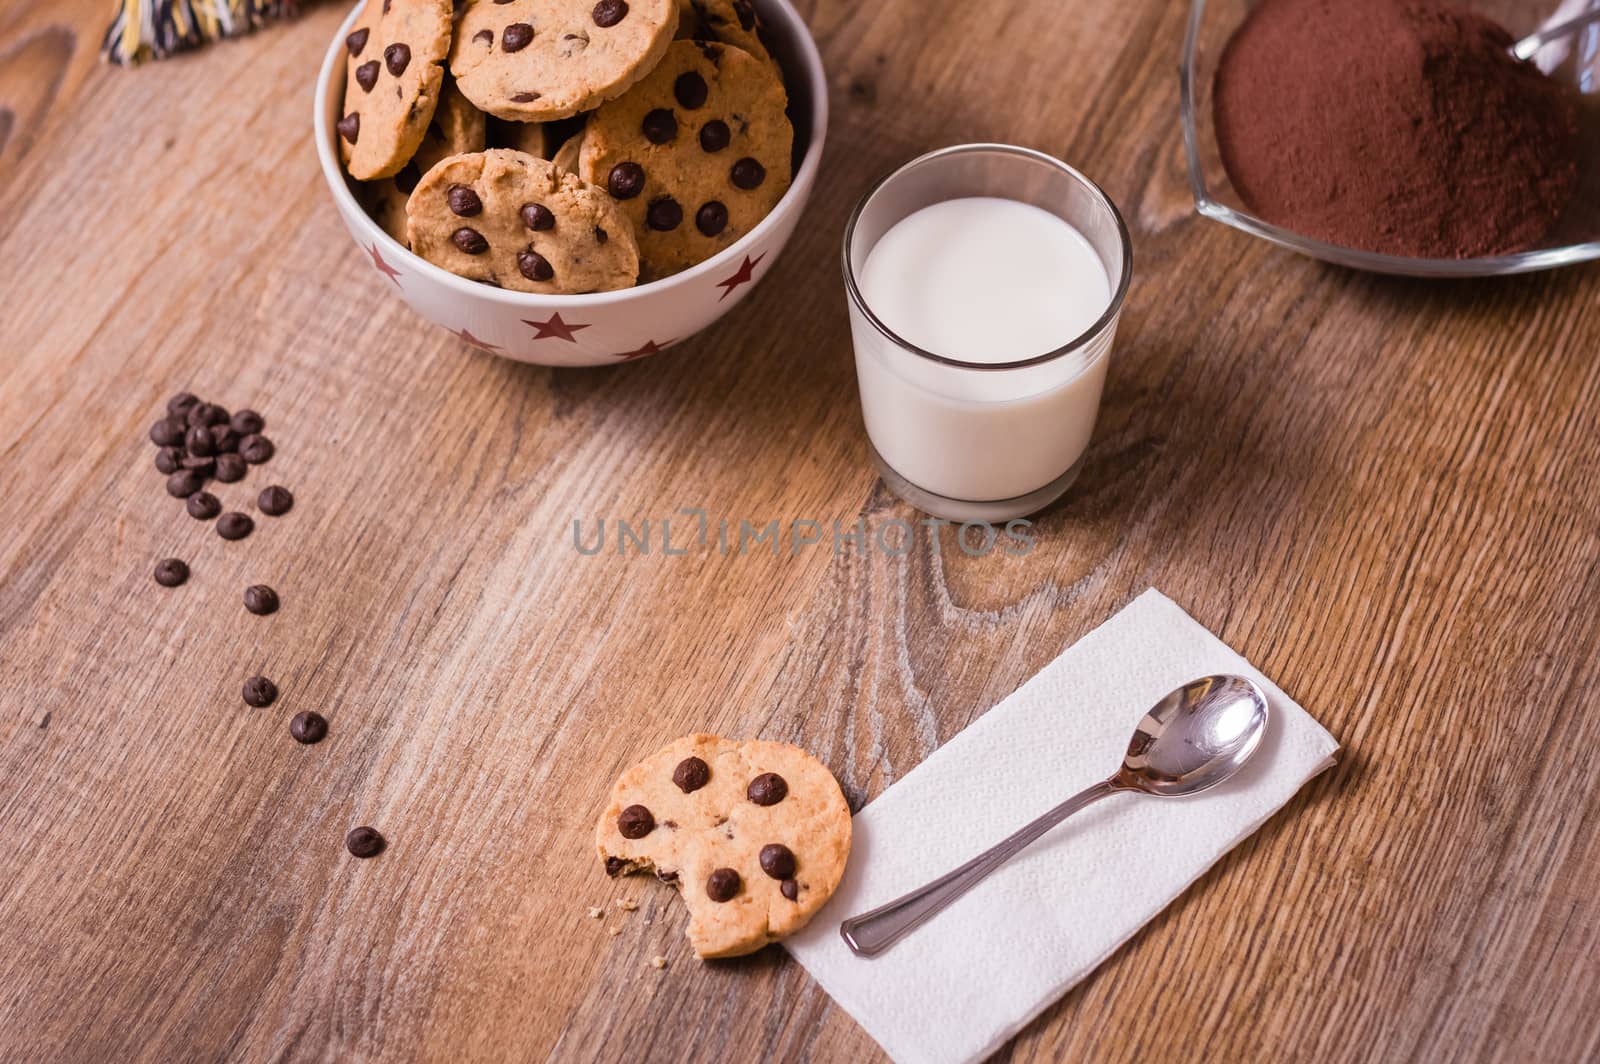 Closeup of chocolate chip cookies on stars bowl and milk glass over a wooden background